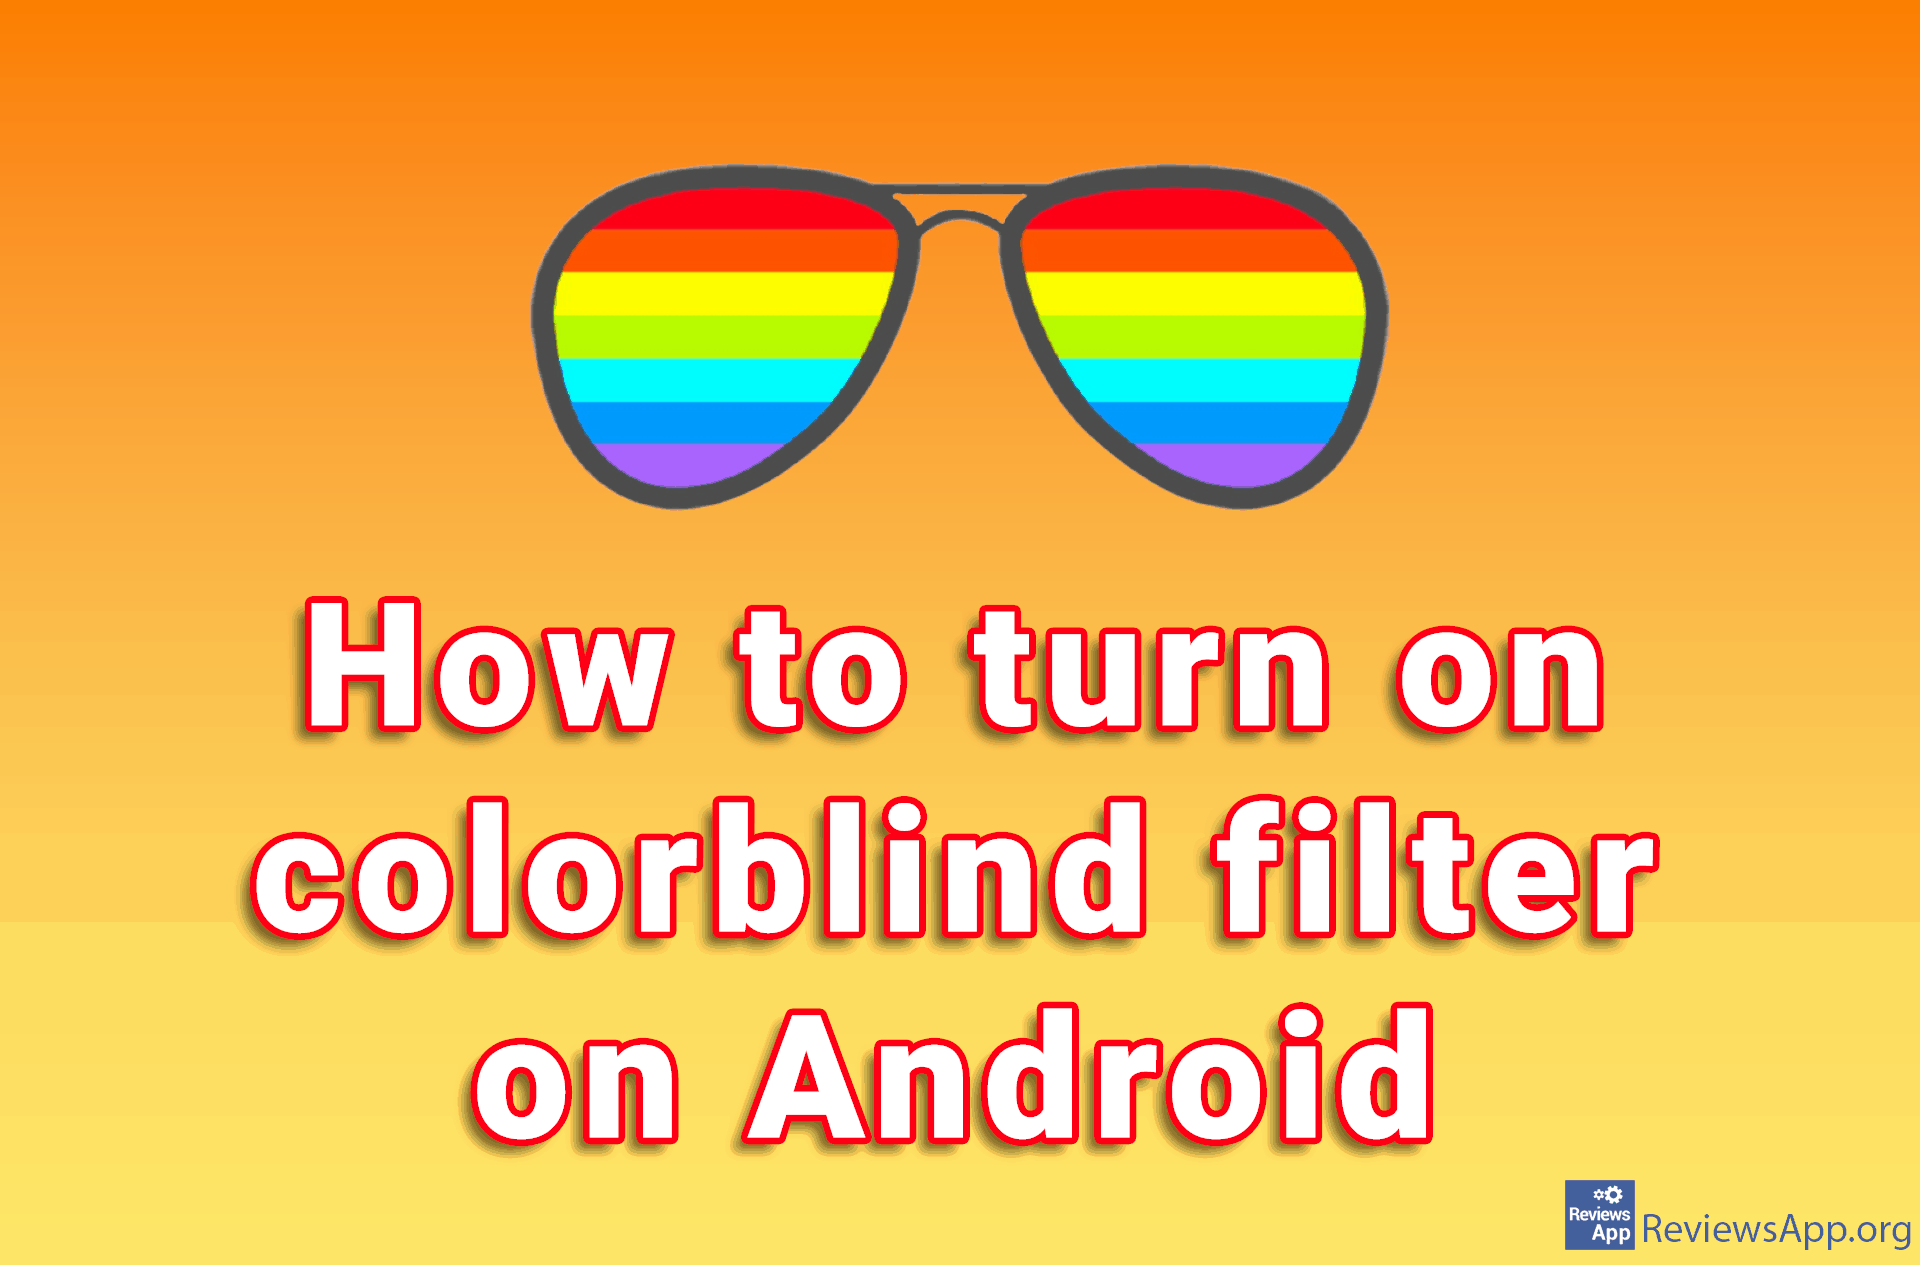 How to turn on colorblind filter on Android